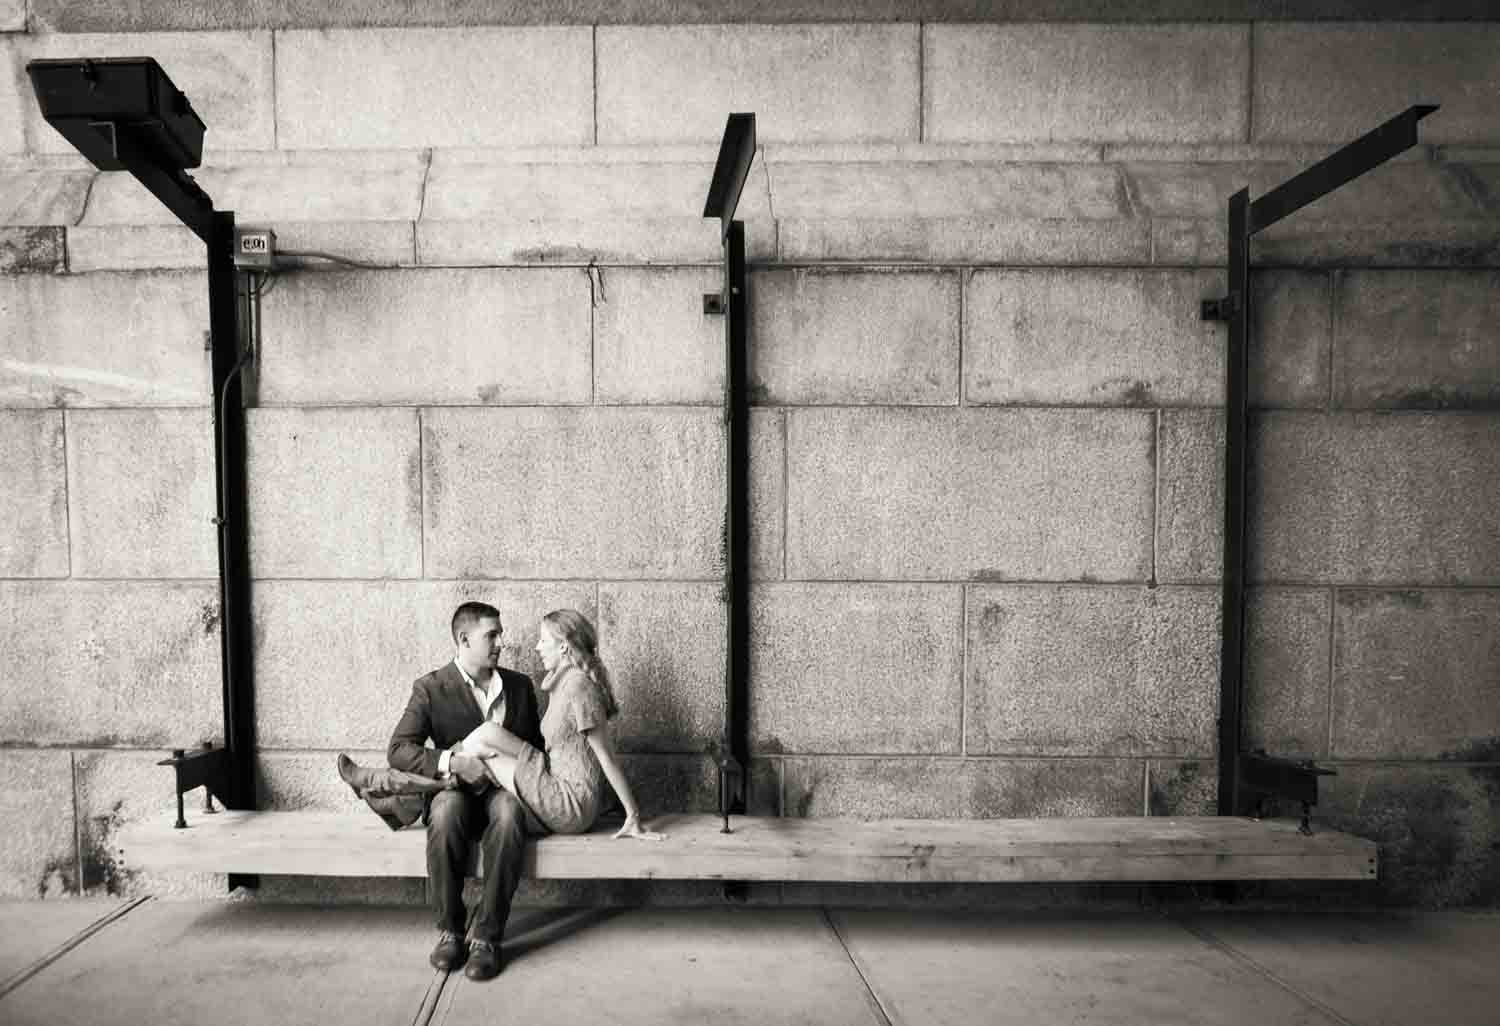 Black and white photo of woman sitting on bench with legs in man's lap